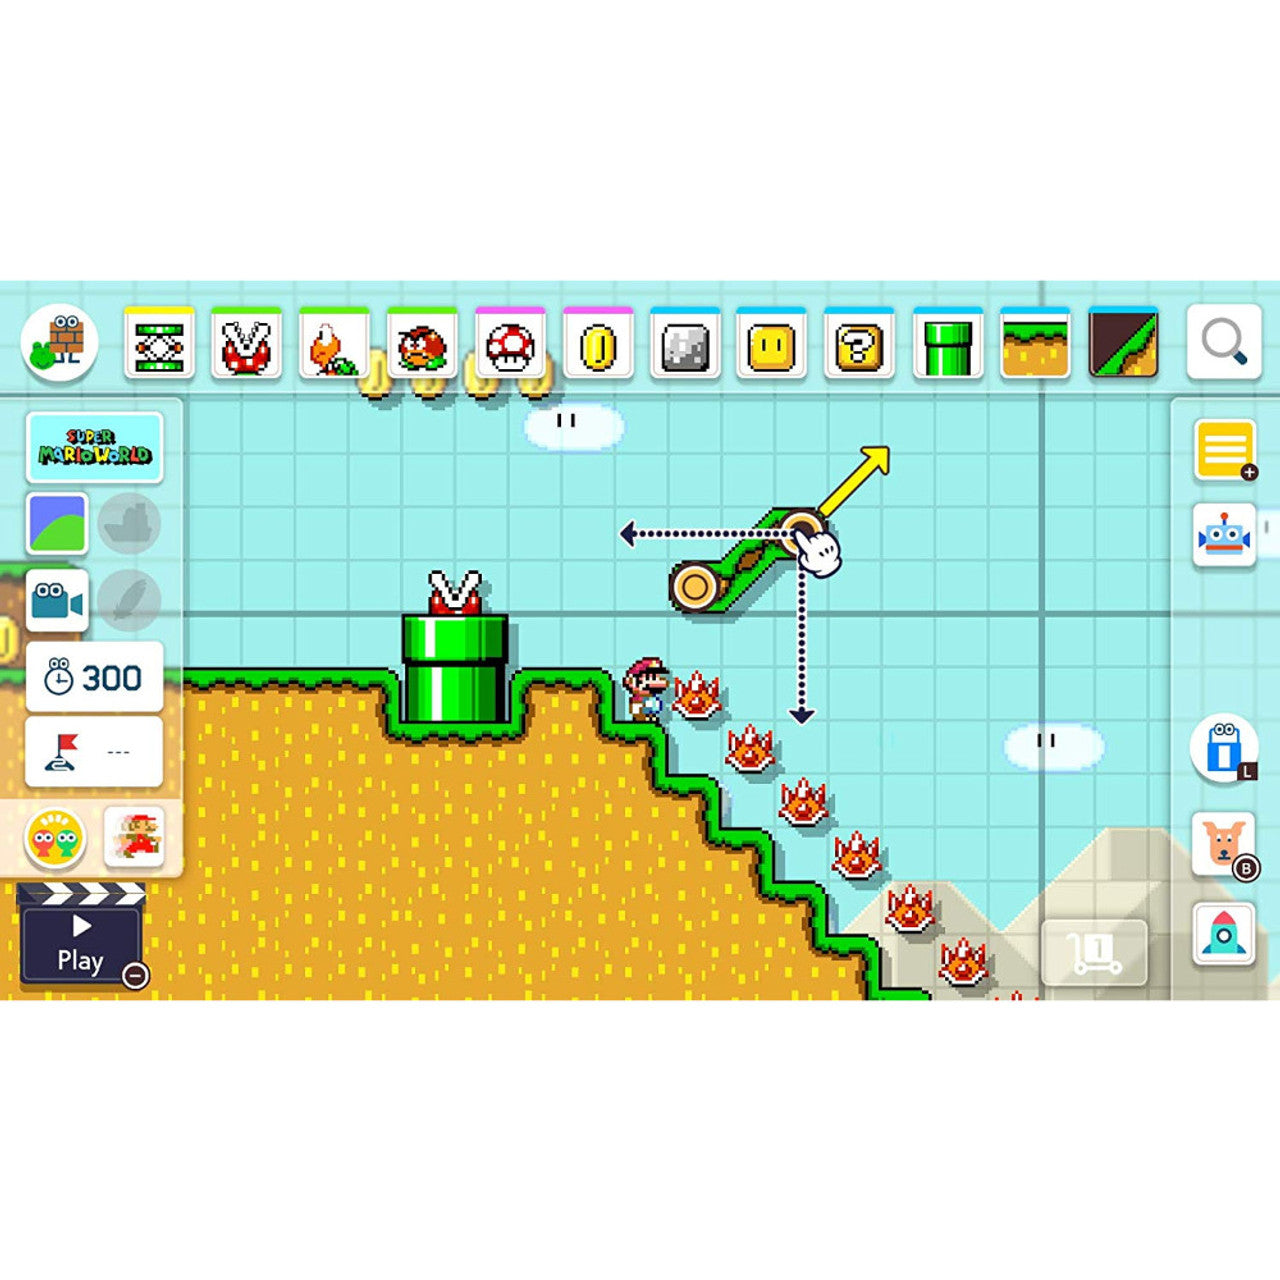 Product Image : This is brand new.<br>Mario fans of the world, unite! Now you can play, create, and share the side-scrolling Super Mario courses of your dreams in the Super Mario Maker 2 game, available exclusively on the Nintendo Switch system! Dive into the single-player Story Mode and play built-in courses to rebuild Princess Peach's castle. Make your own courses, alone or together. And with a Nintendo Switch Online membership, share your courses, access a near-endless supply made by others, enjoy online